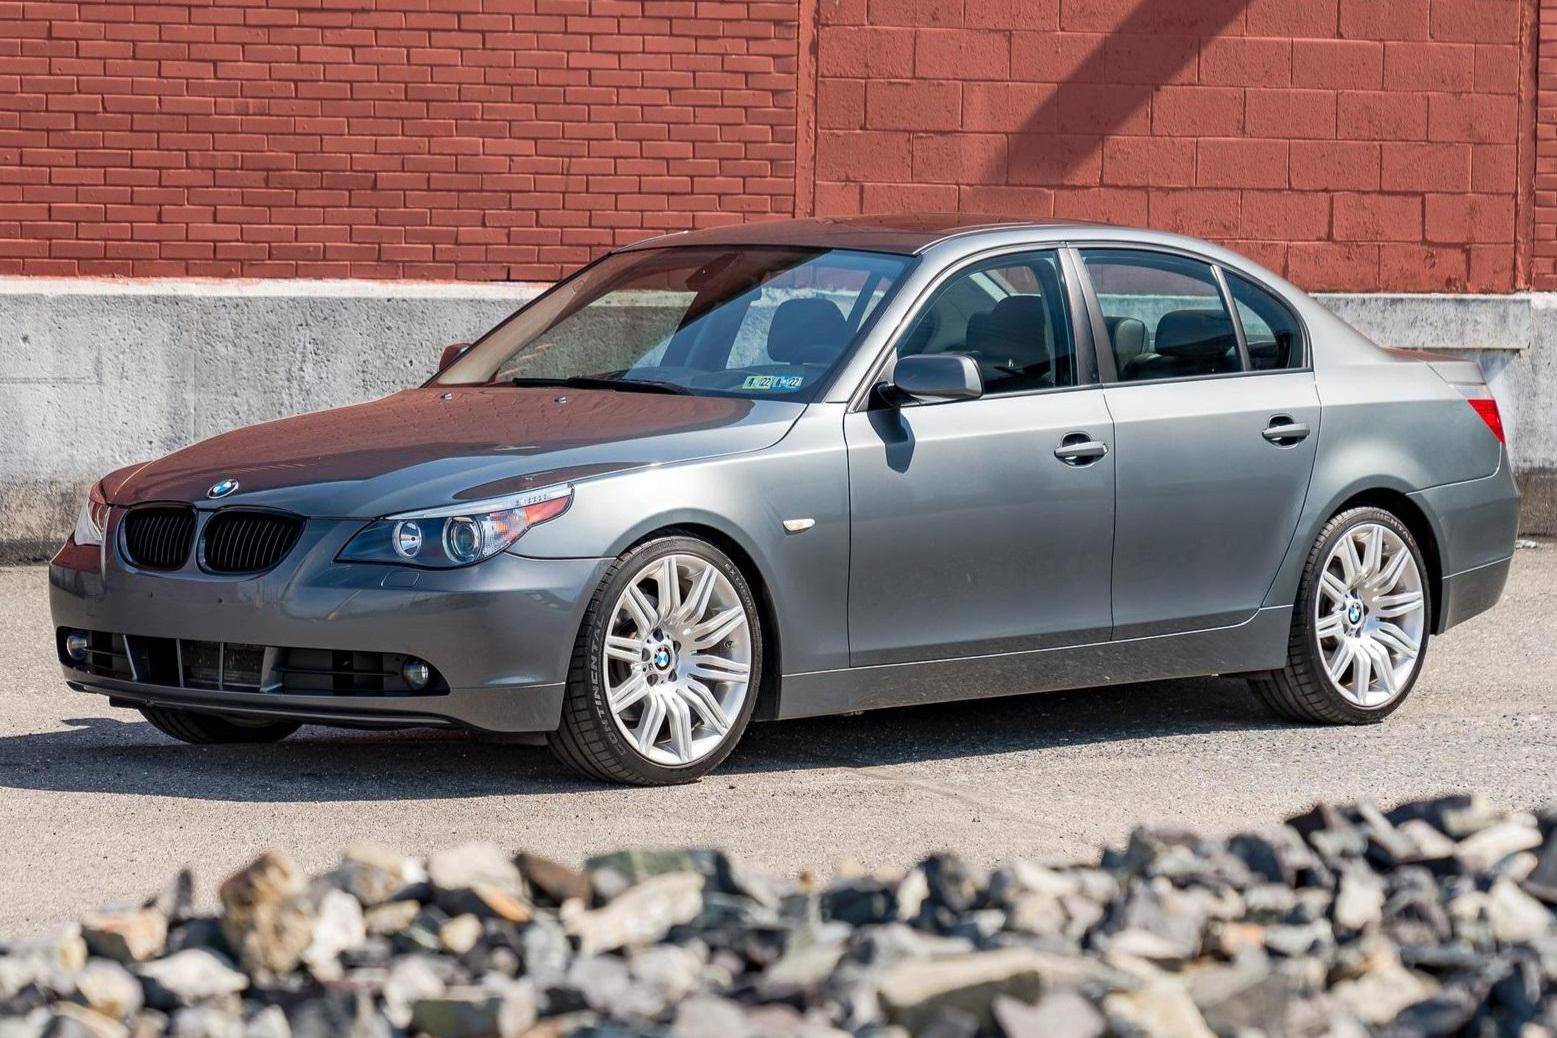 Six-Speed 530i Can Be Yours If You Win This Auction